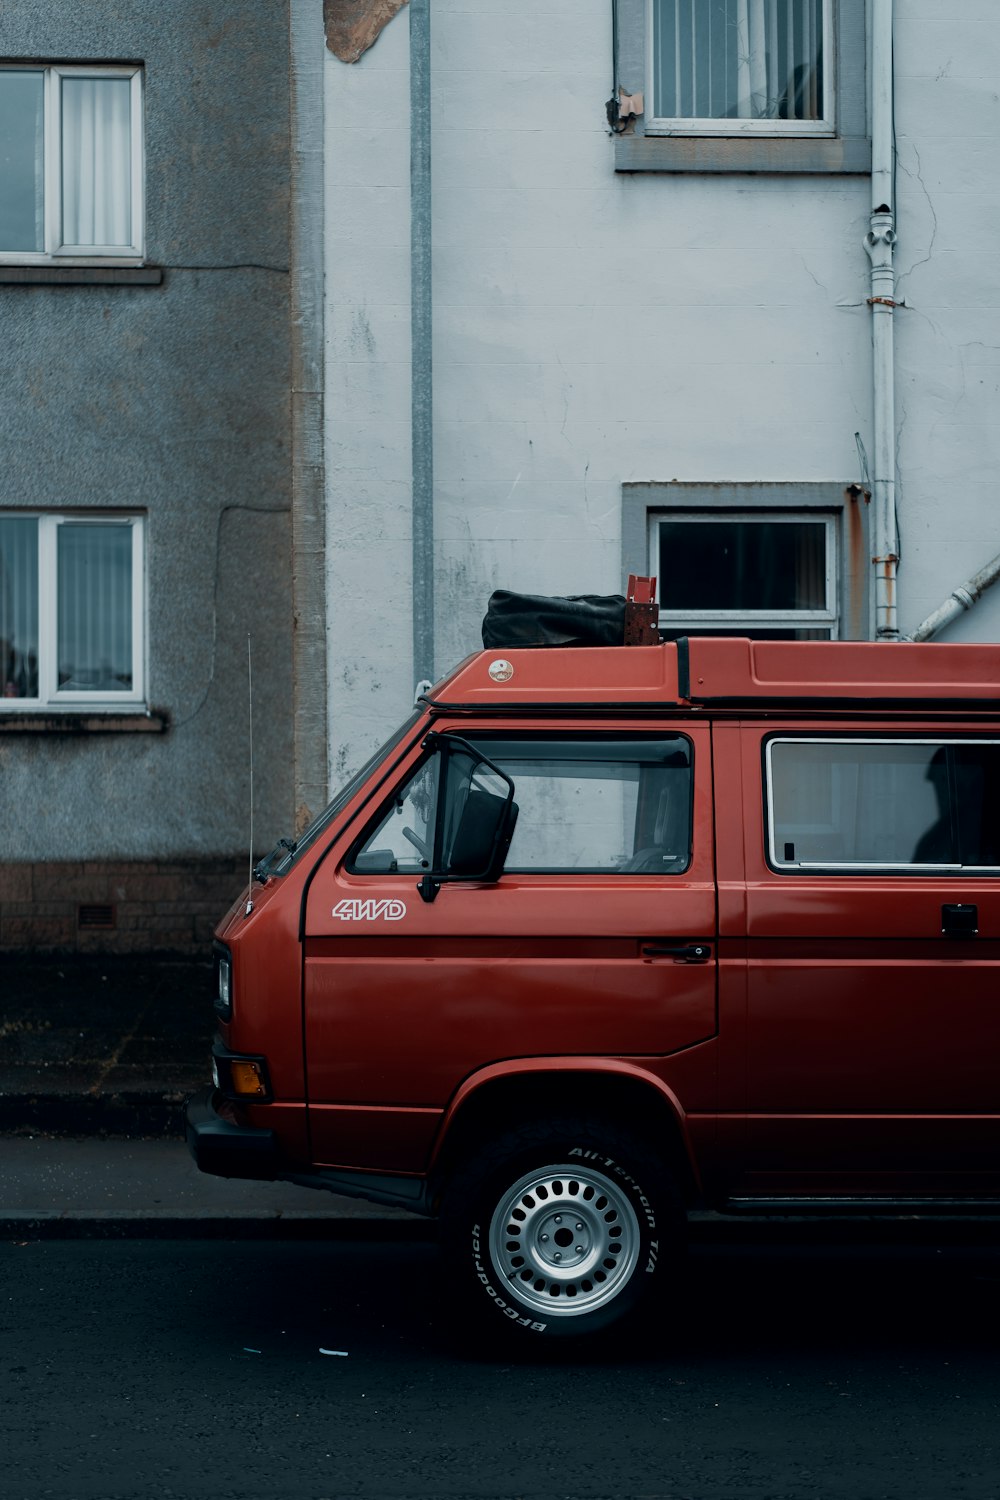 red van parked beside gray concrete building during daytime